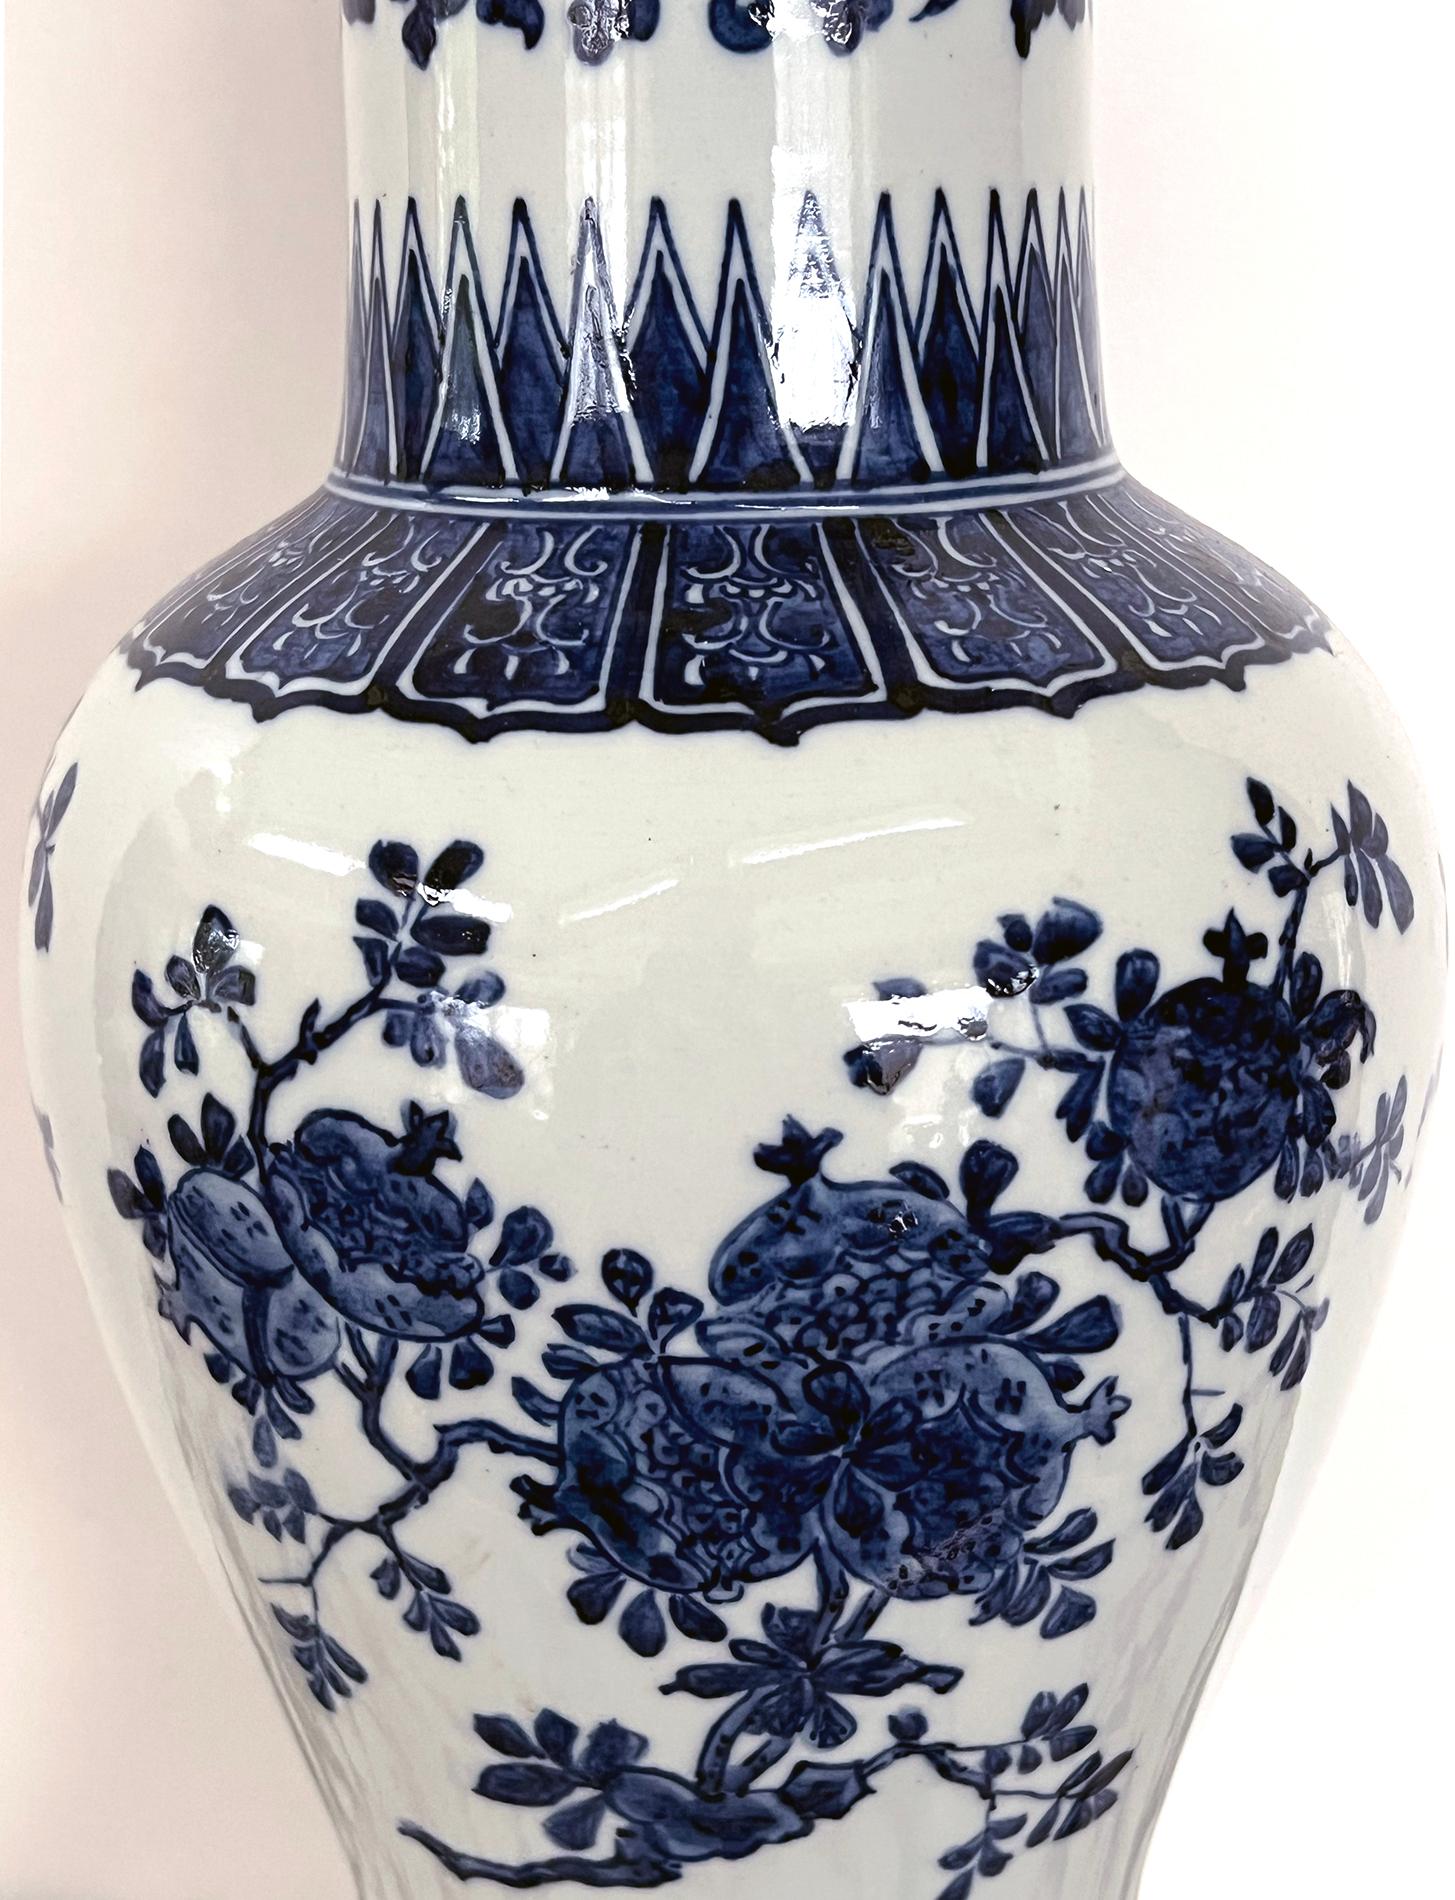 each tall vase with flaring neck above a bulbous body ending in a splayed foot; adorned overall with hand-painted lappet perimeter bands and floral vines; raised on custom wooden painted bases